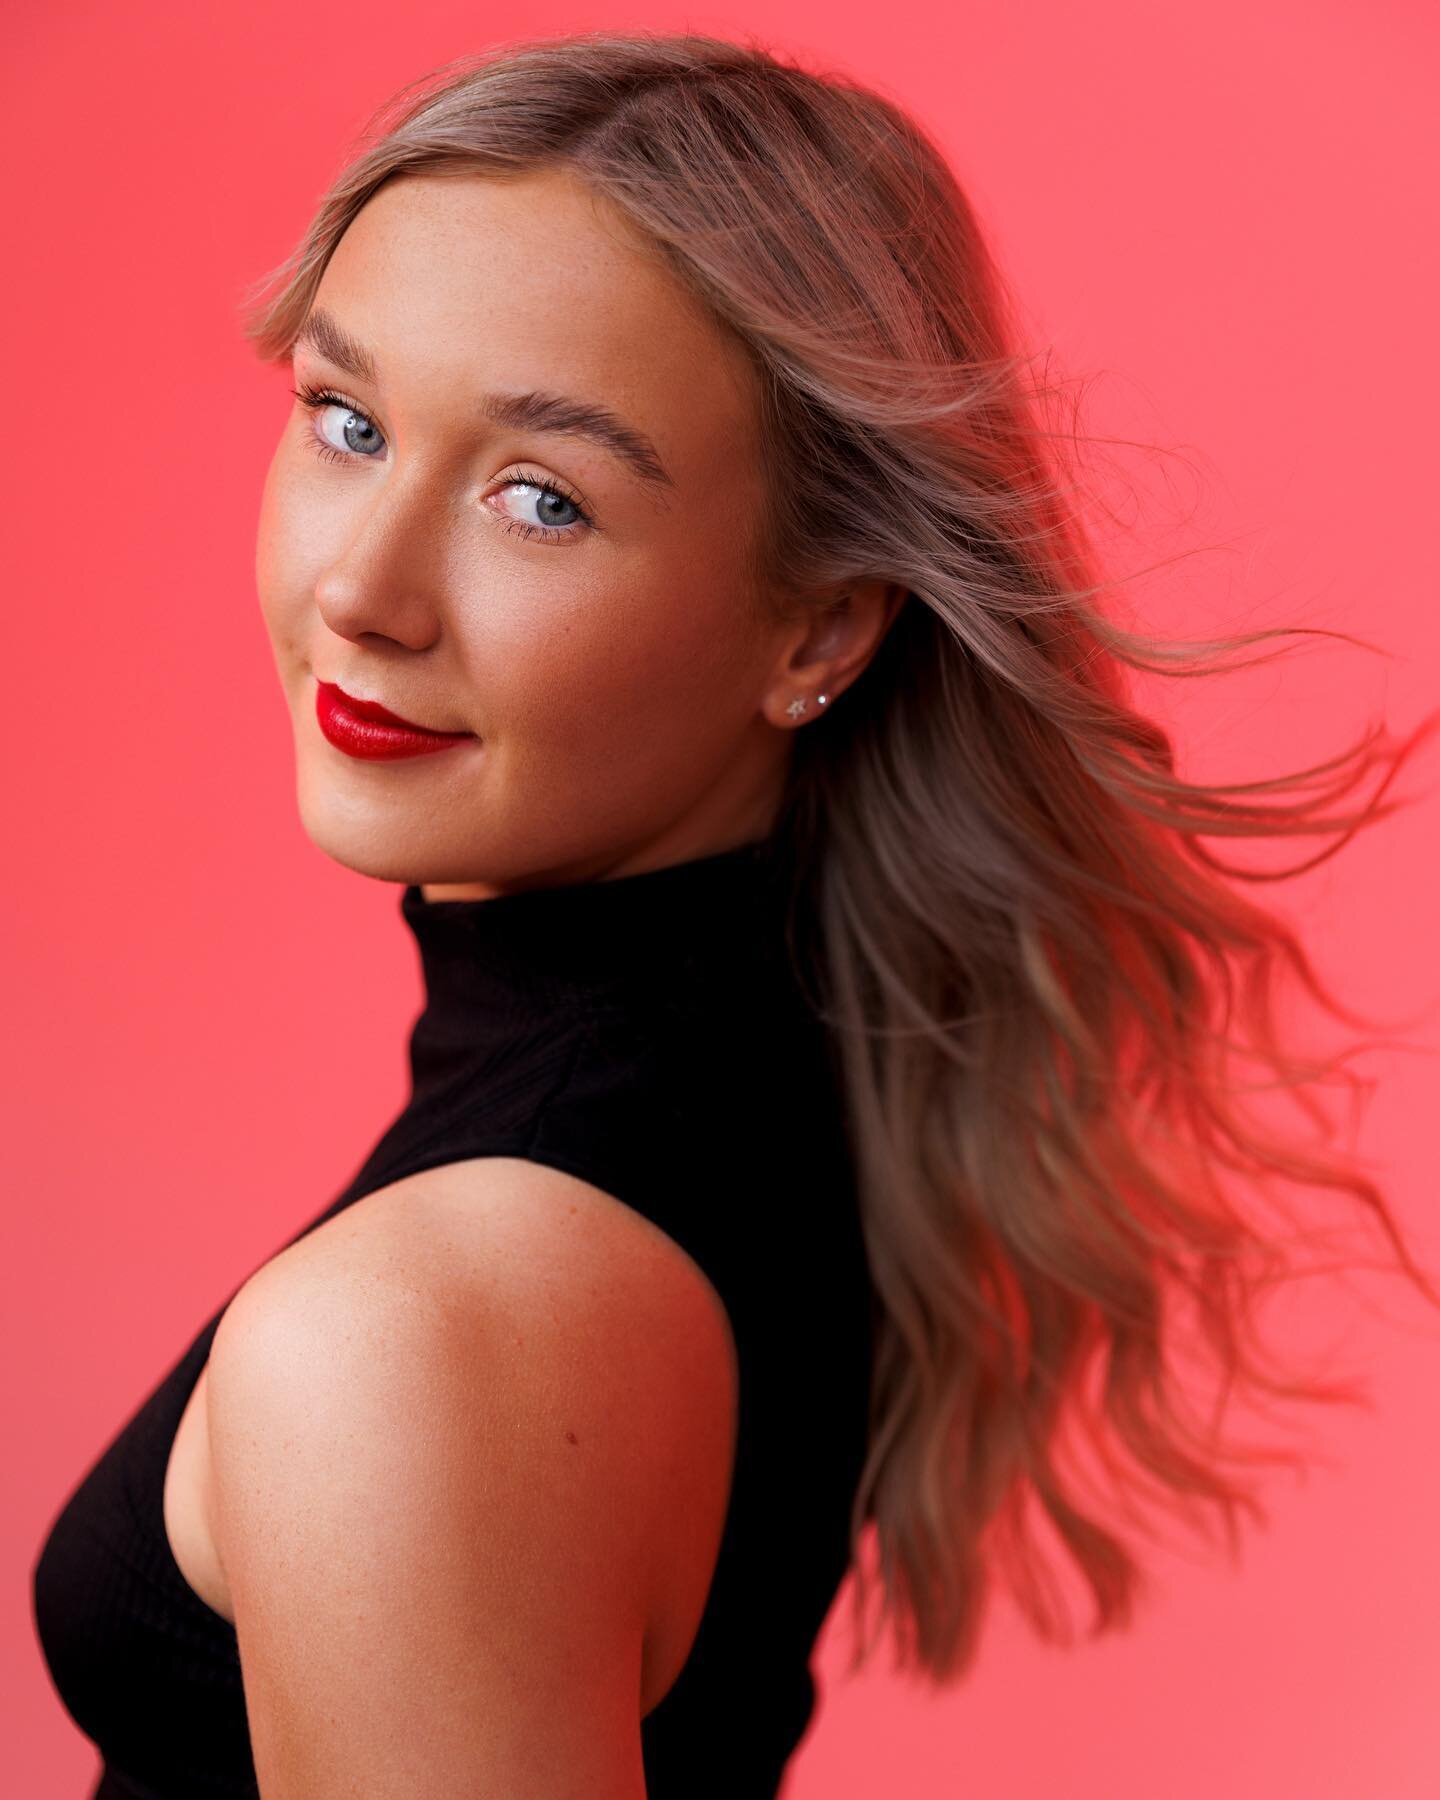 Lil bit of red 💃🏼 

@sophieeewest 

#headshots #portrait #portraitphotography #performer #dancerphotography #dancephotography #red